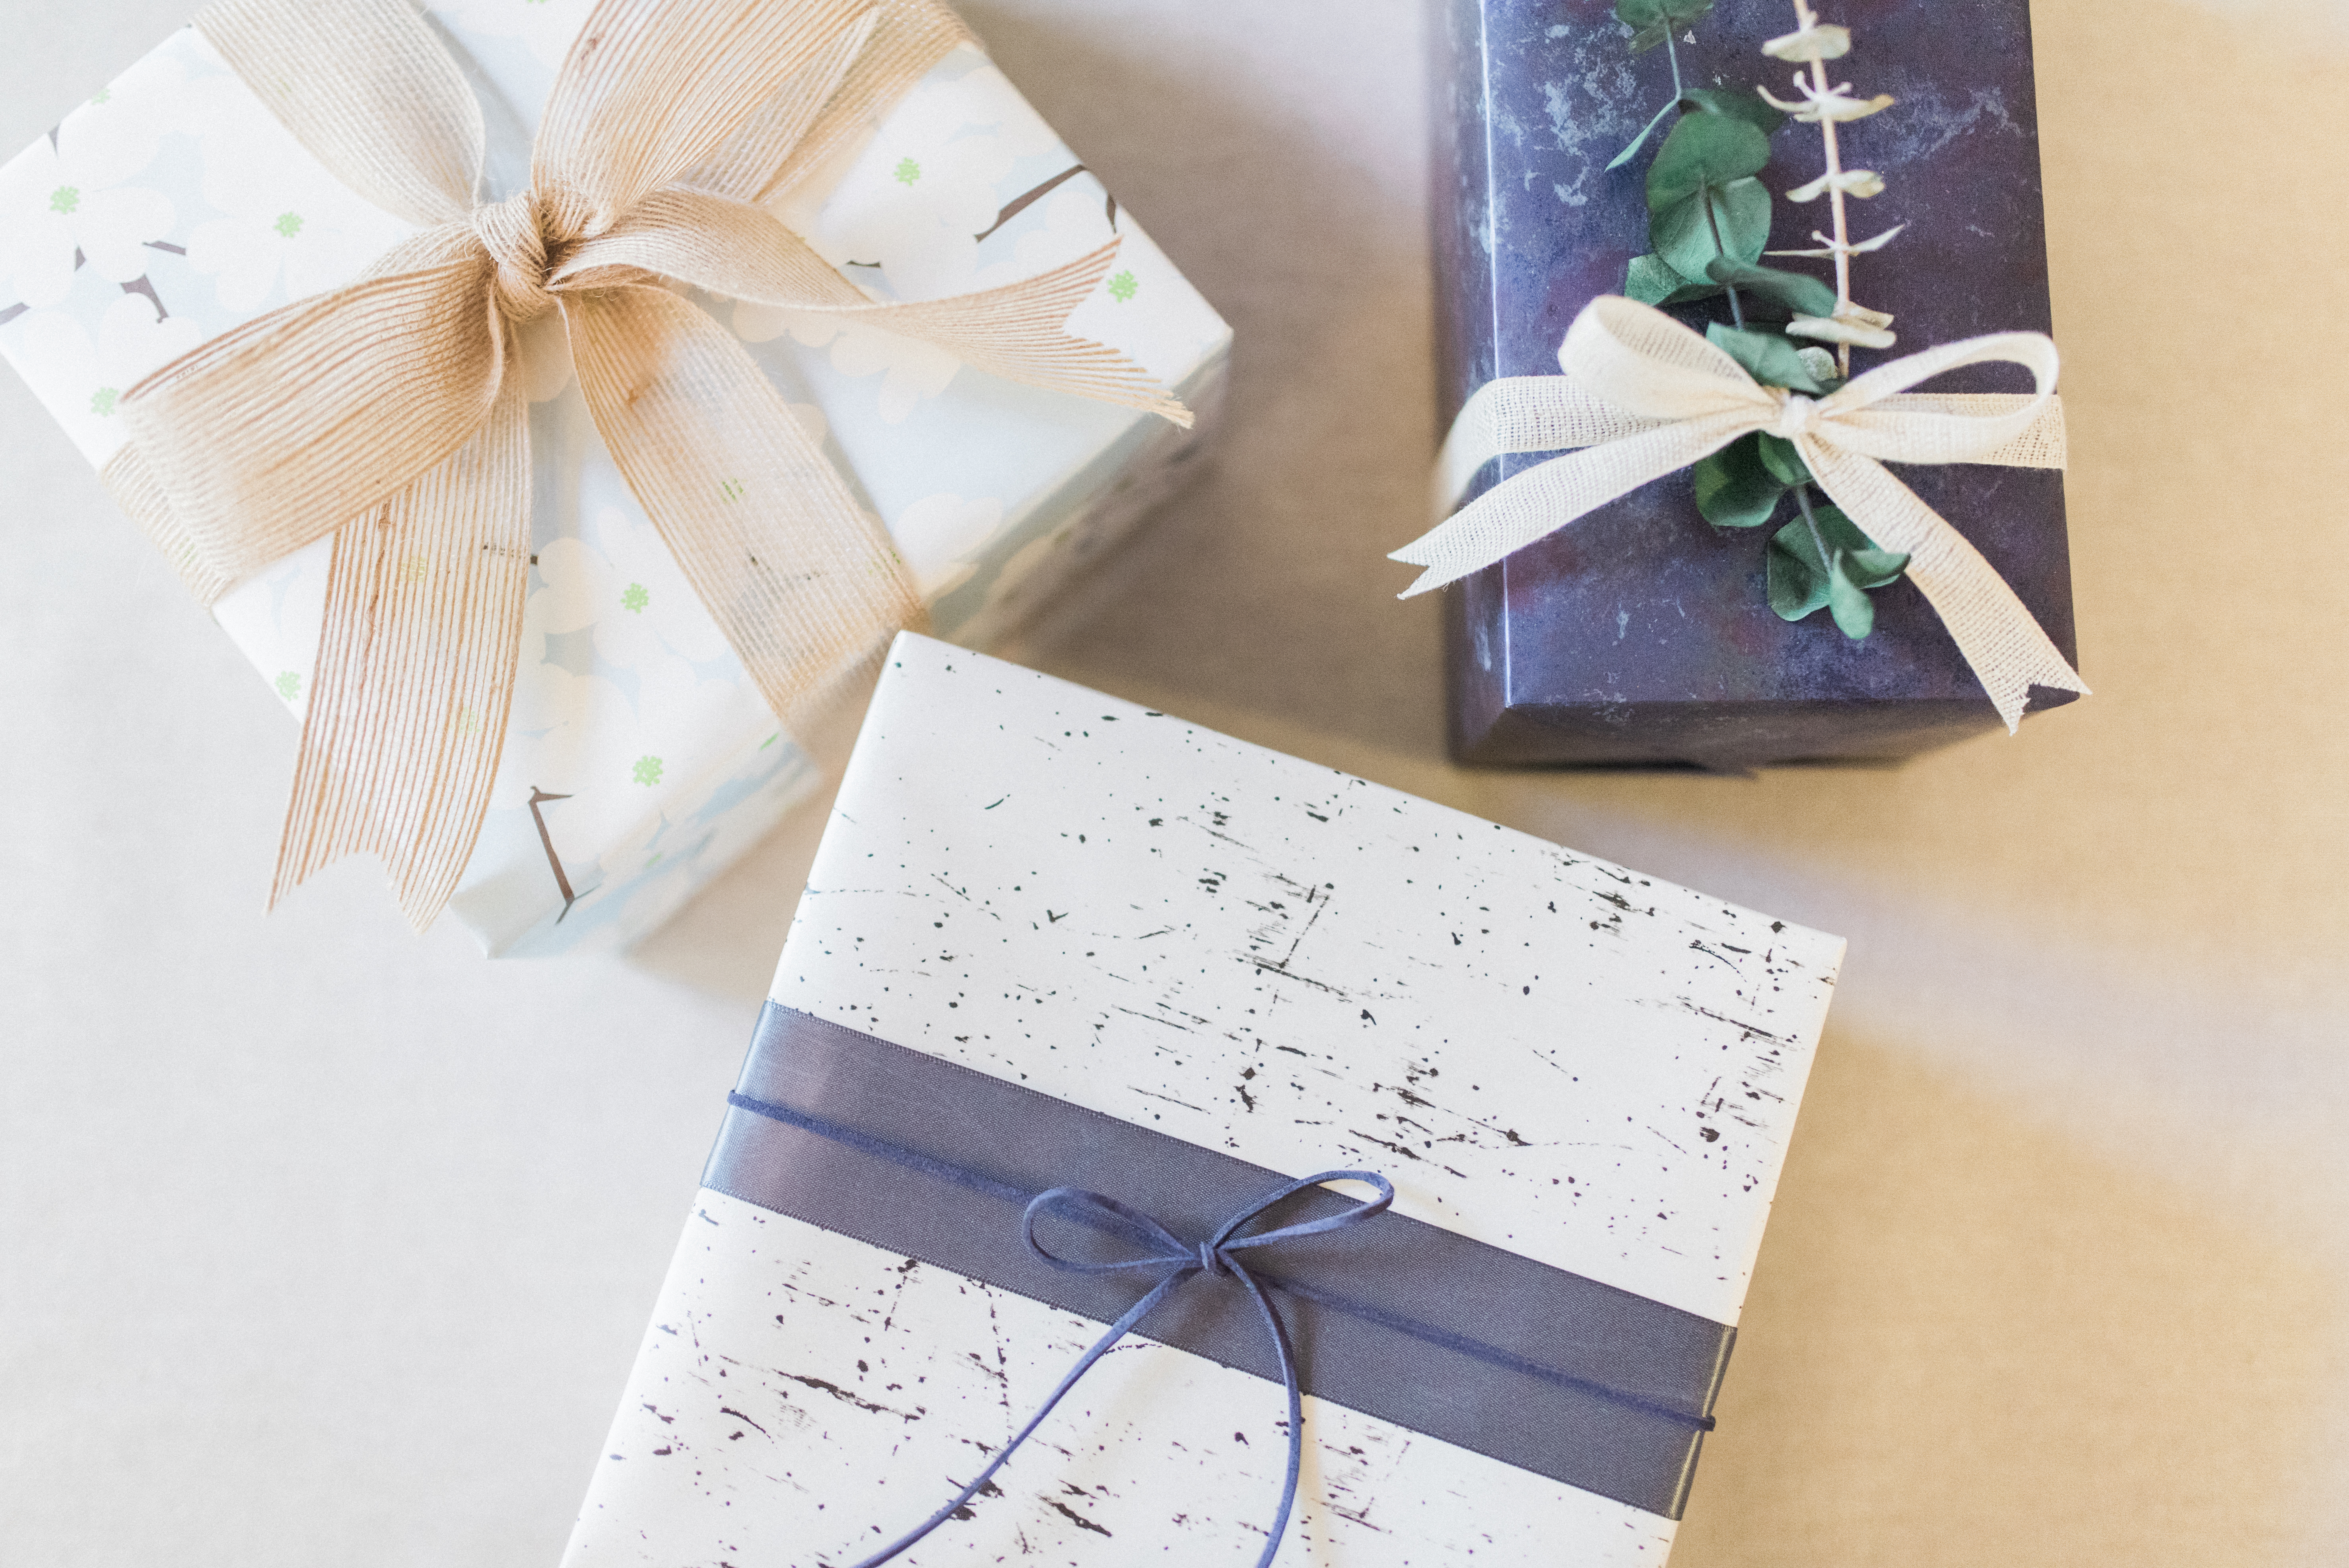 Lifestyle blogger Lexi of Glitter, Inc. shares gift wrapping ideas and tricks to master gift wrapping like a pro, including how to repurpose leftover flowers, i.e., with beautiful dried flowers, that we'll teach you how to make, for the prettiest gift wrapping around. - Gift Wrapping Tips by popular North Carolina lifestyle blogger, Glitter, Inc.